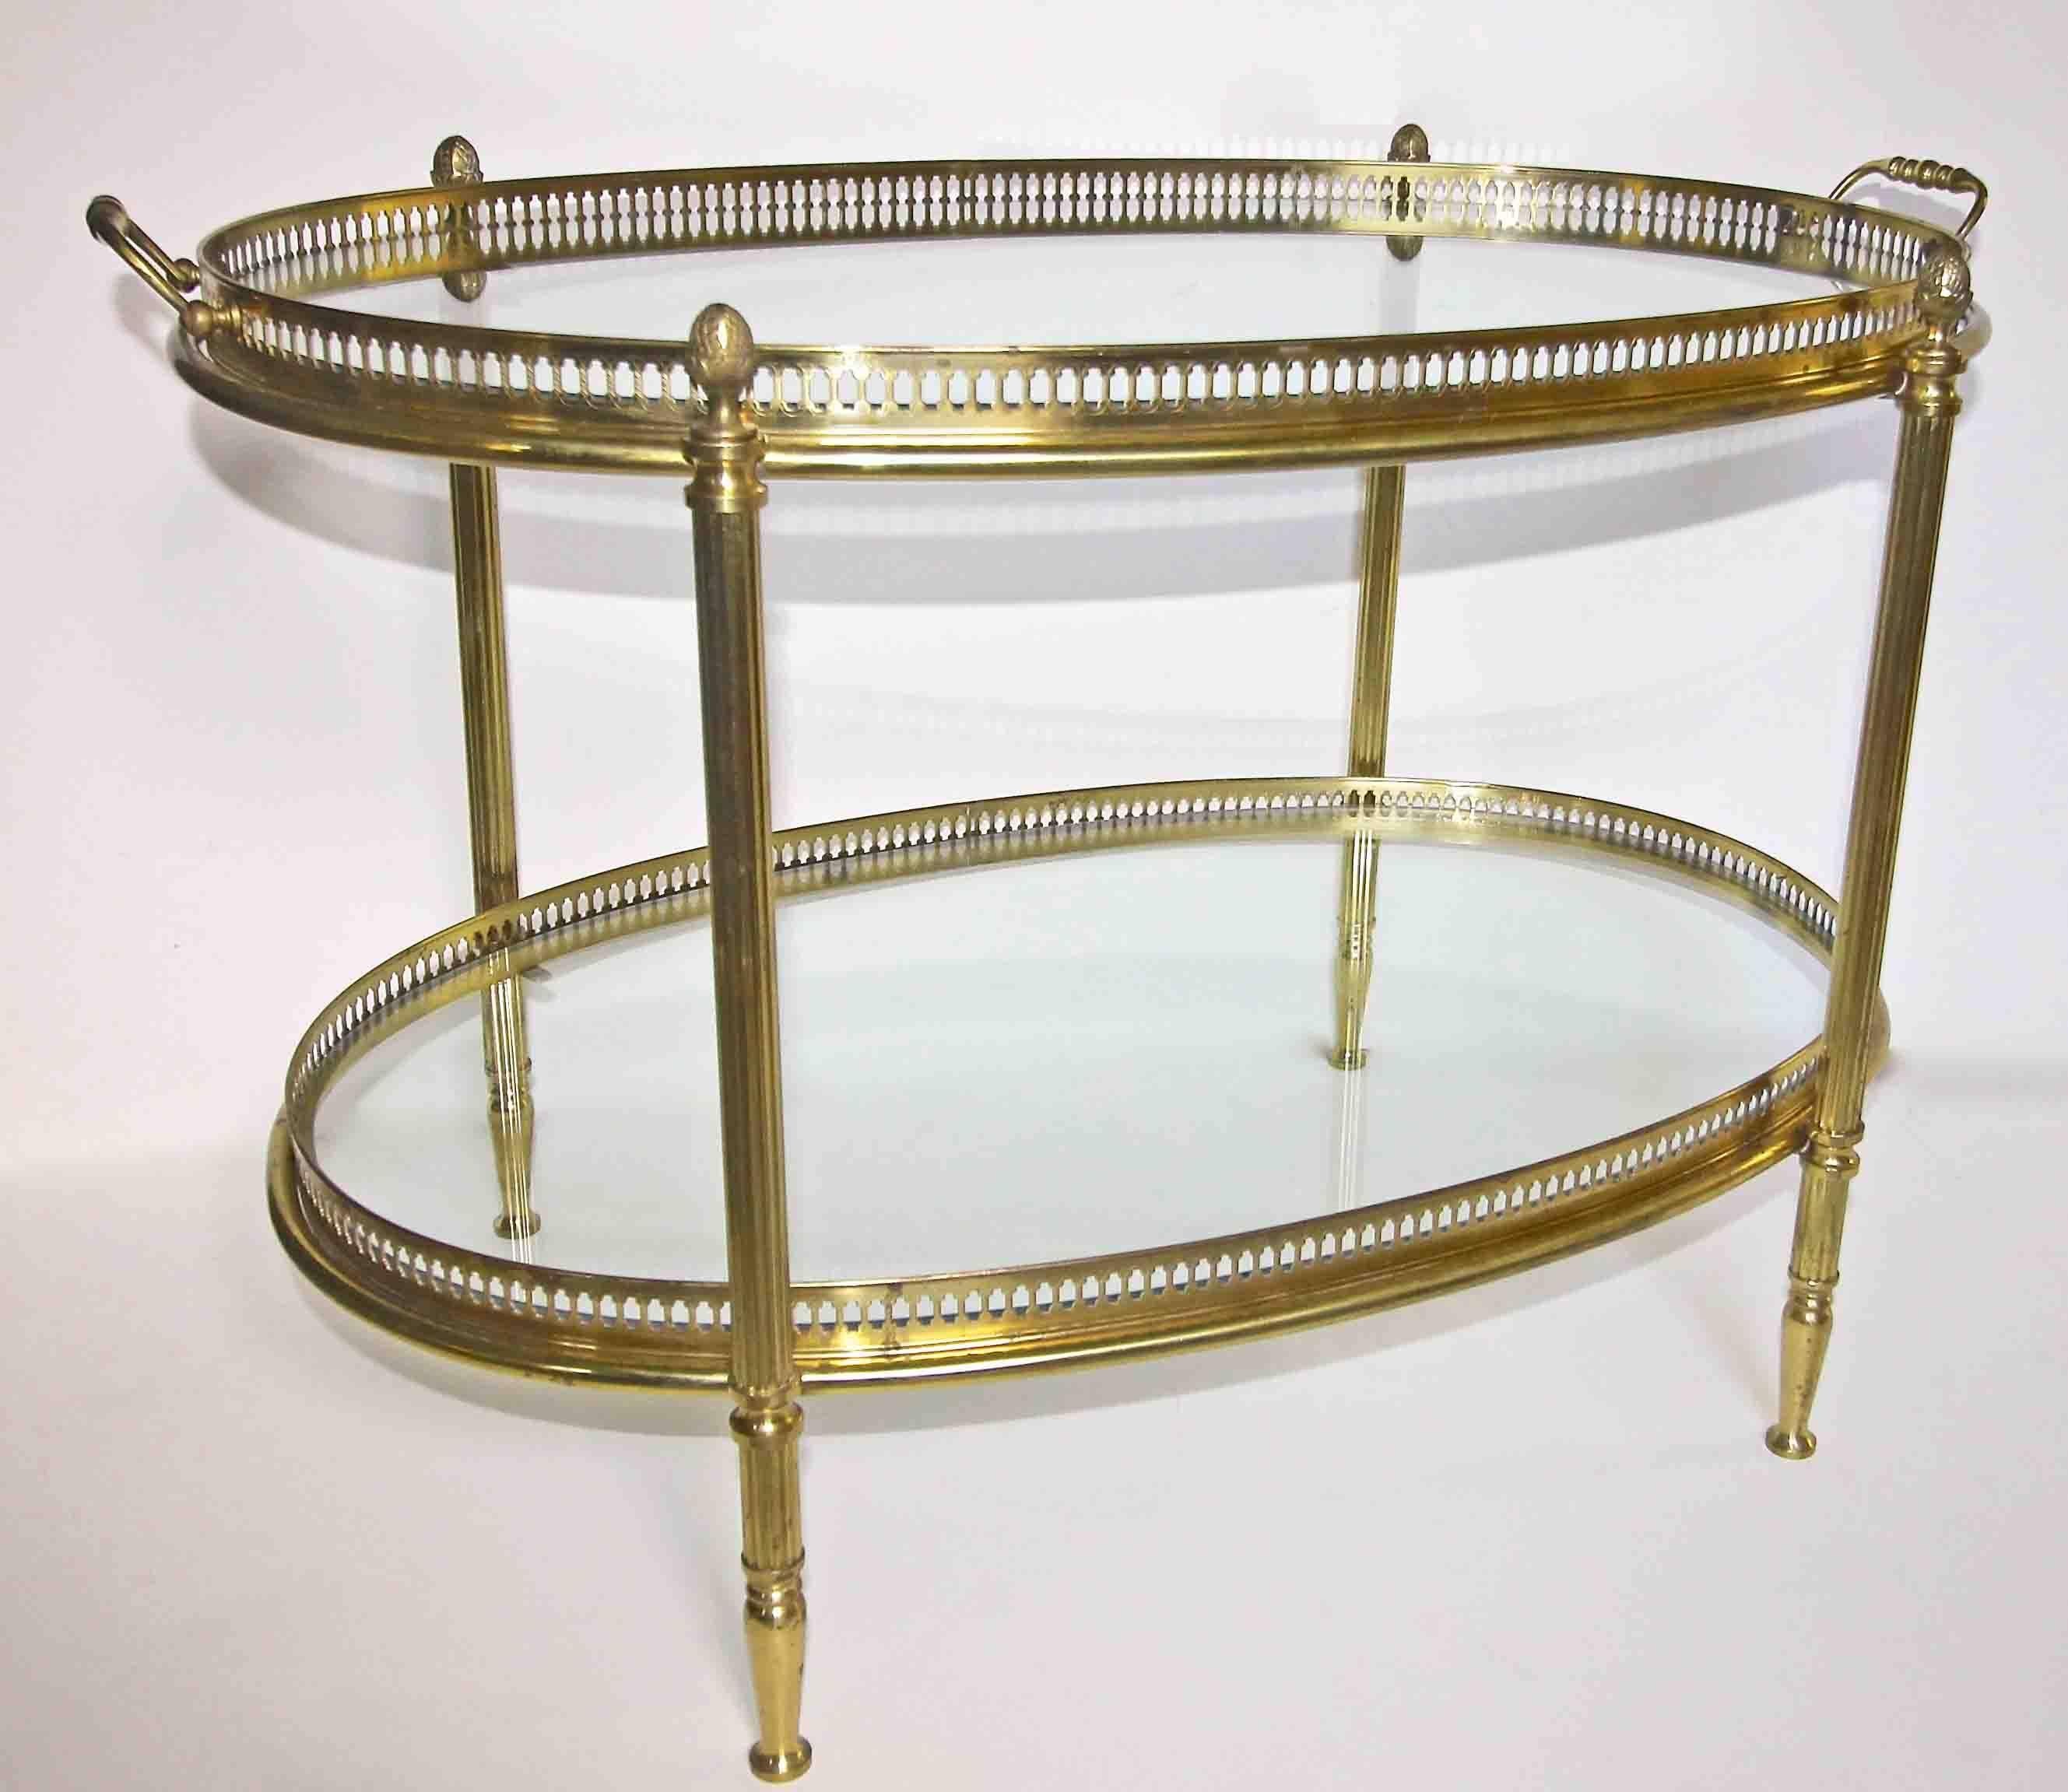 Oval two-tier brass French side table or tea table with removable glass inset tray at top. Nice detailing including reeded legs, pierced gallery railing and acorn finials.